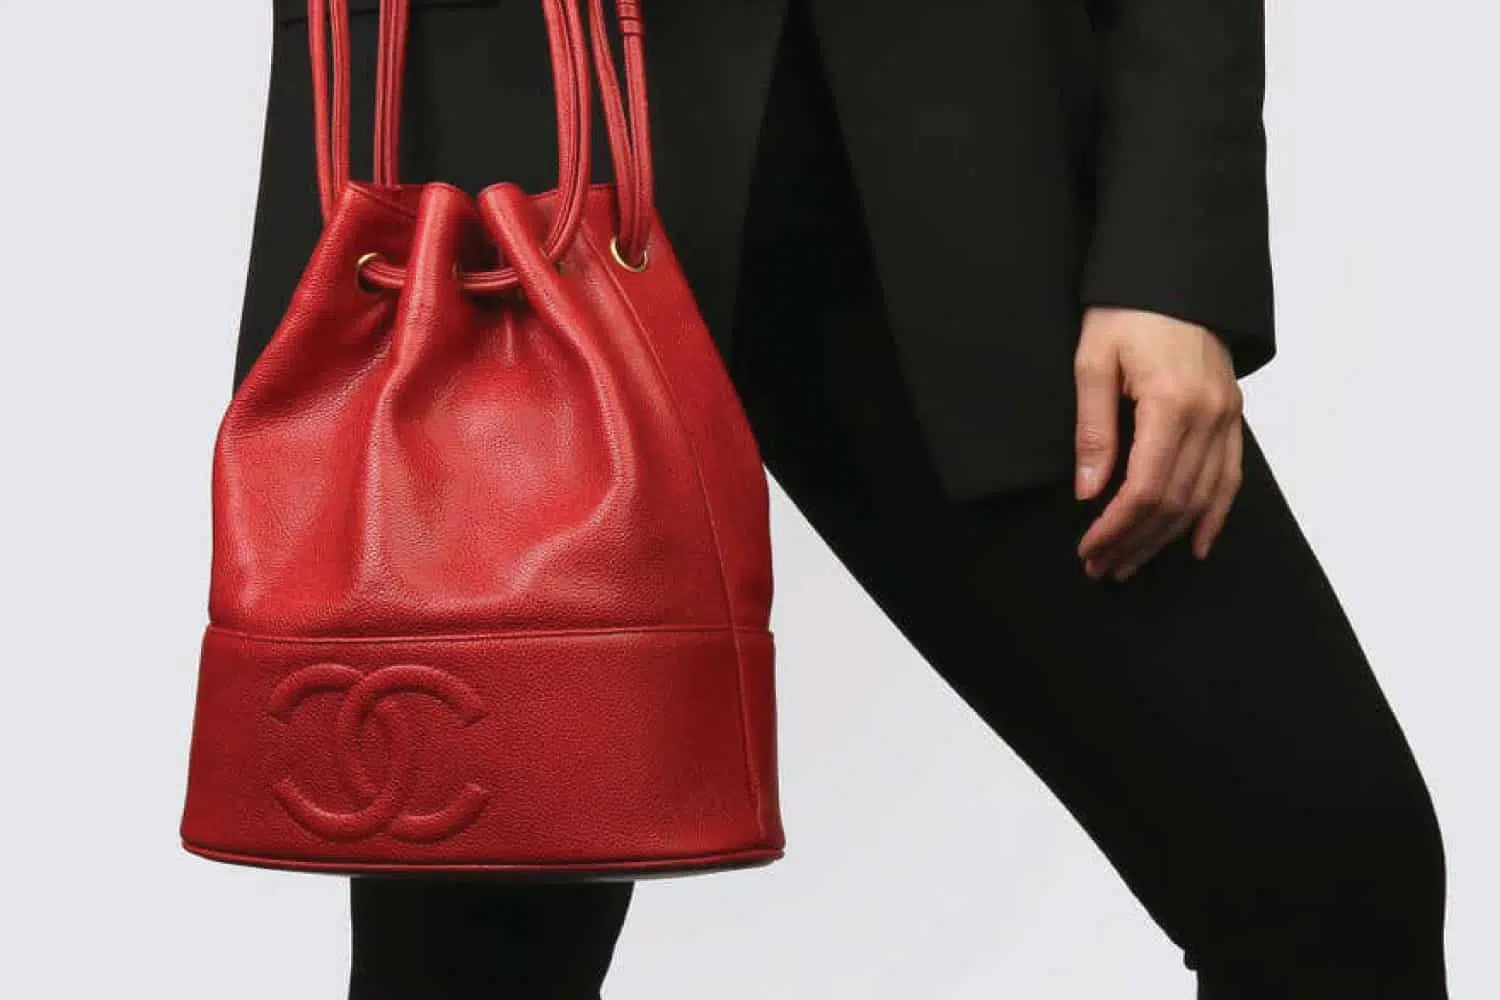 You can't go wrong with a black bag, and Miami went classic this